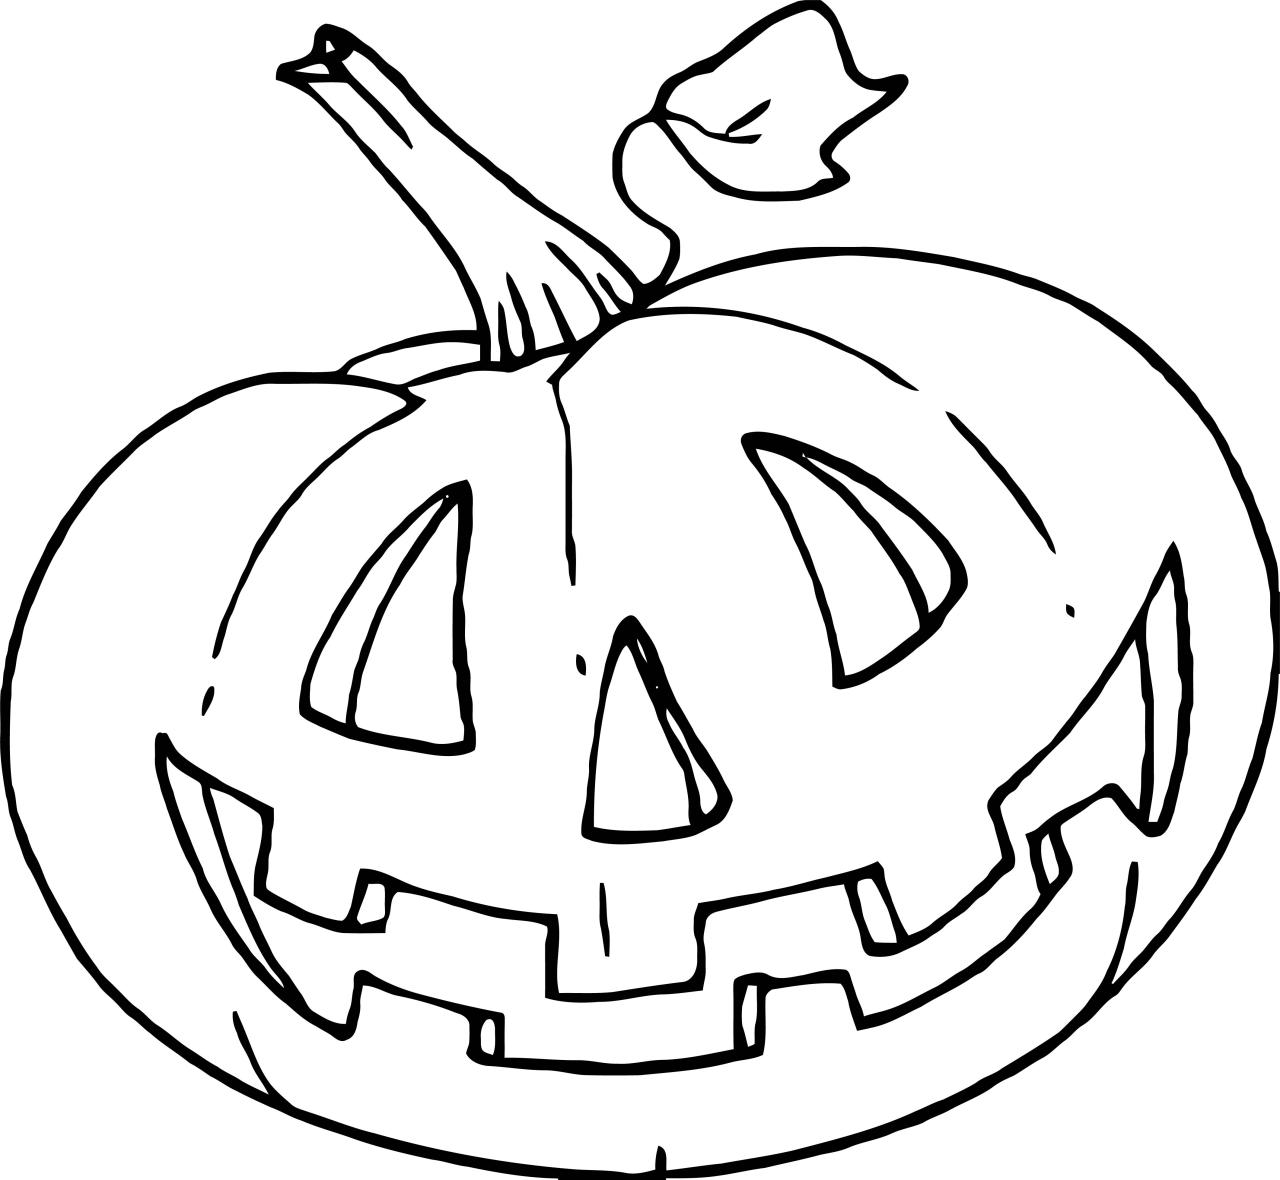 Just Halloween Pumpkin Coloring Page